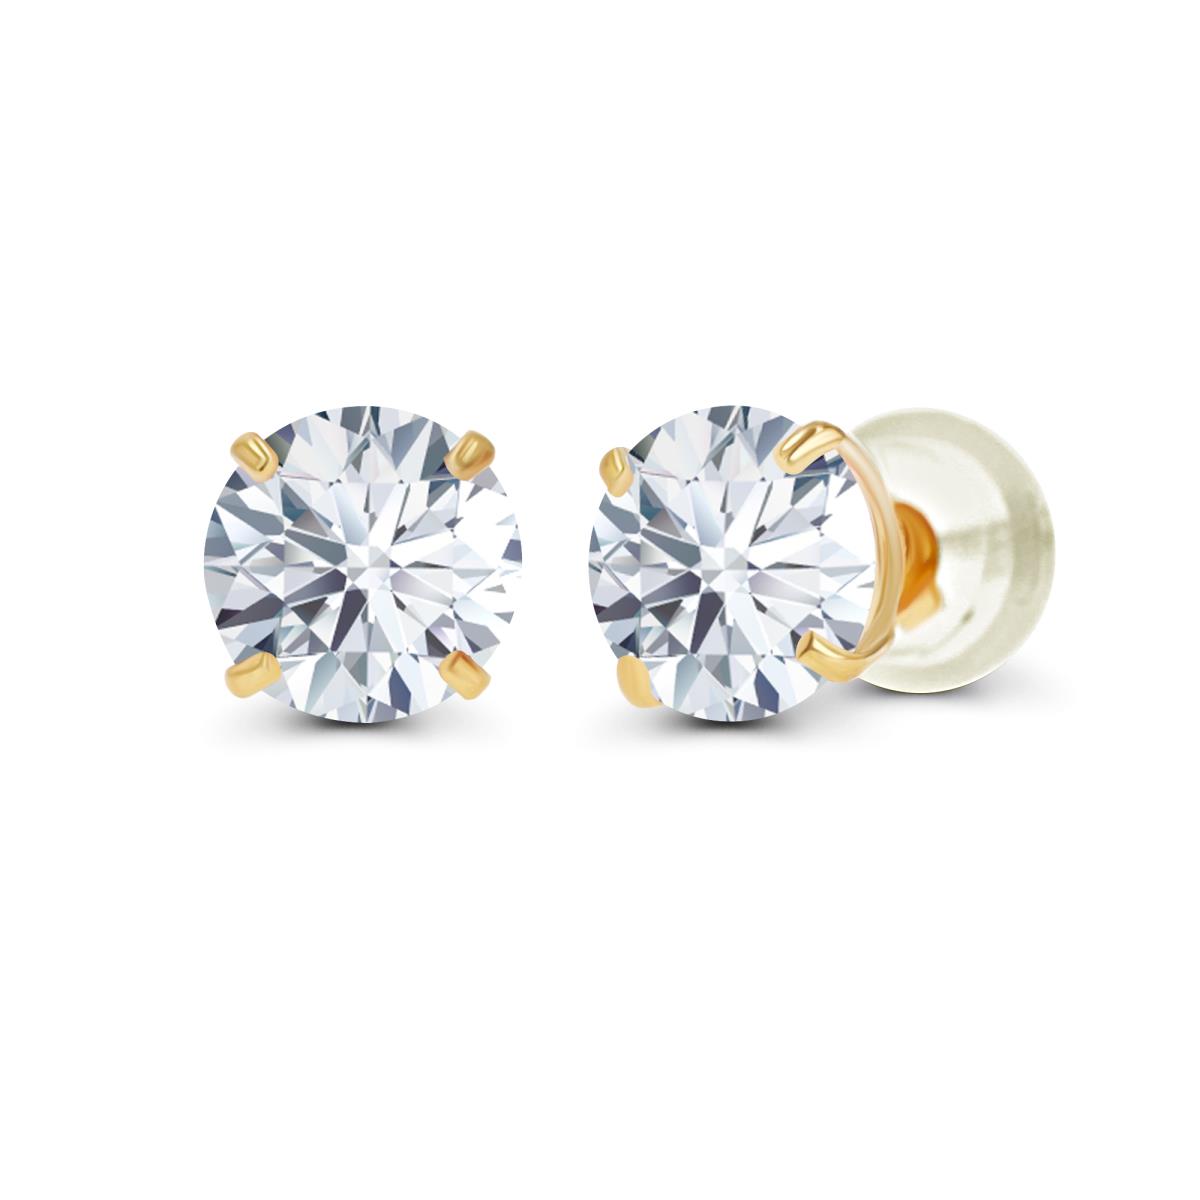 Sterling Silver Yellow 6.00mm Round Semi Precious White Topaz Stud Earring